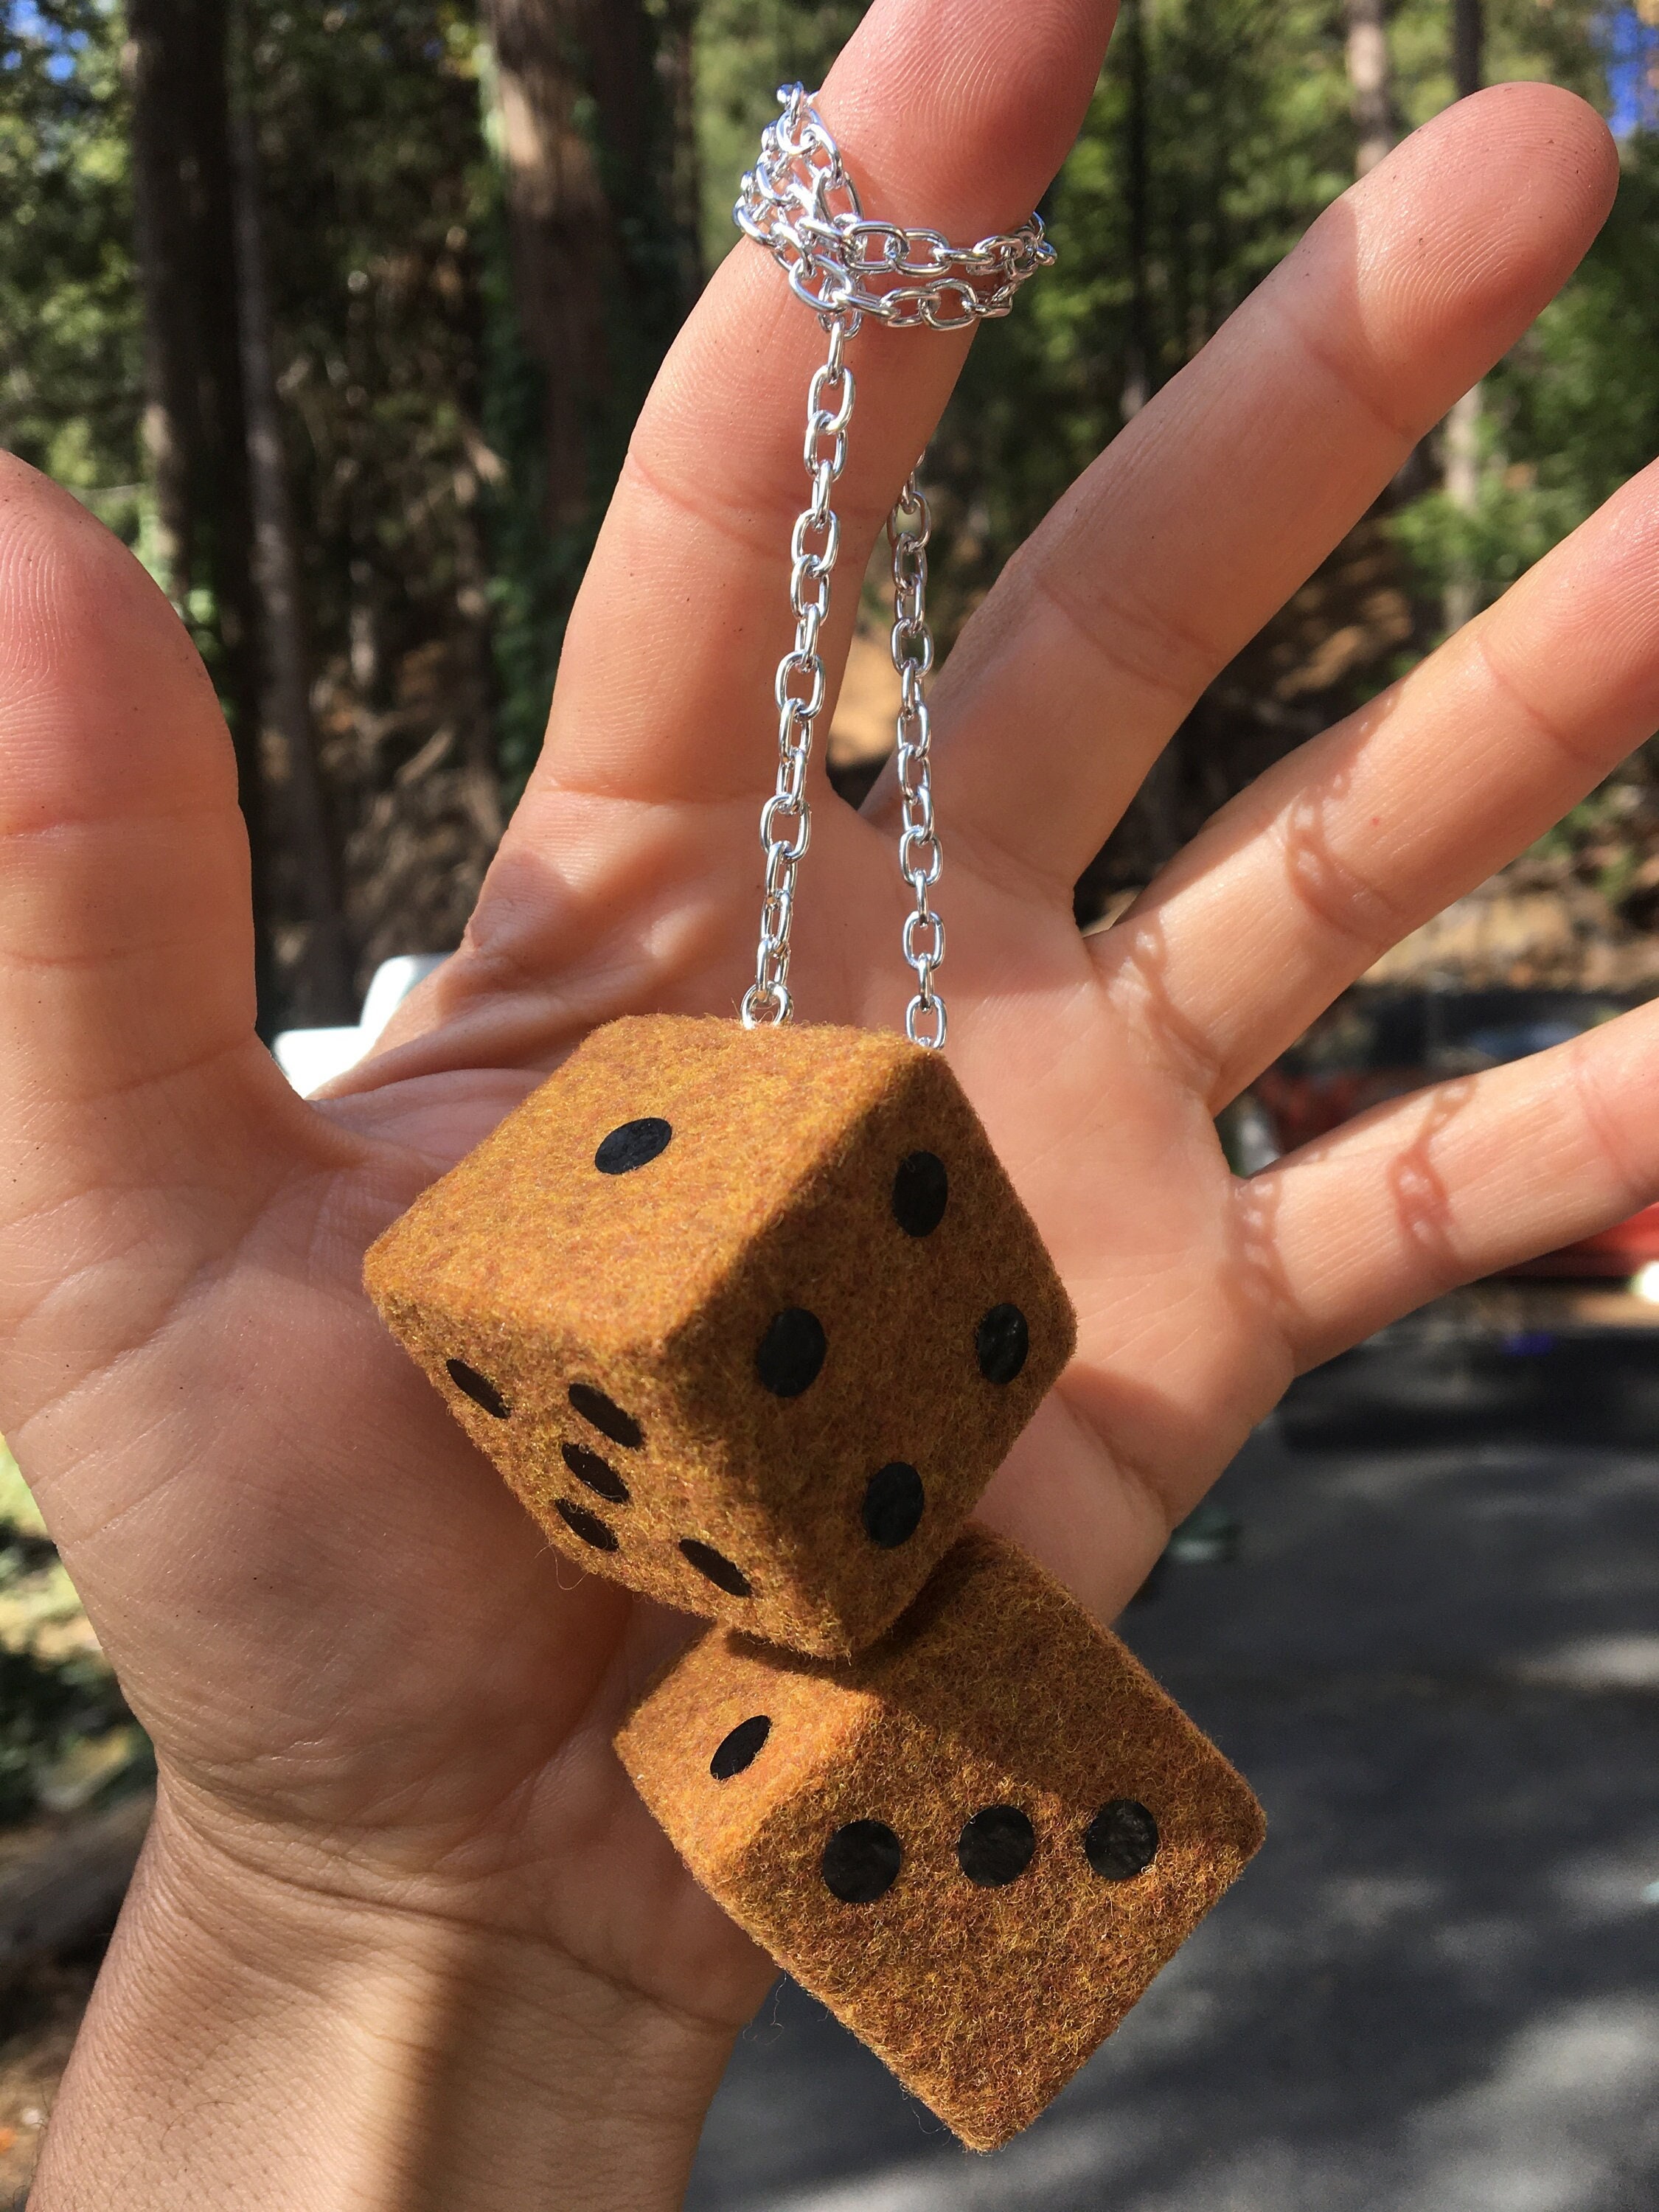 Copper Canyon / Brown Fuzzy Dice With Black Dots and Chain or Cord